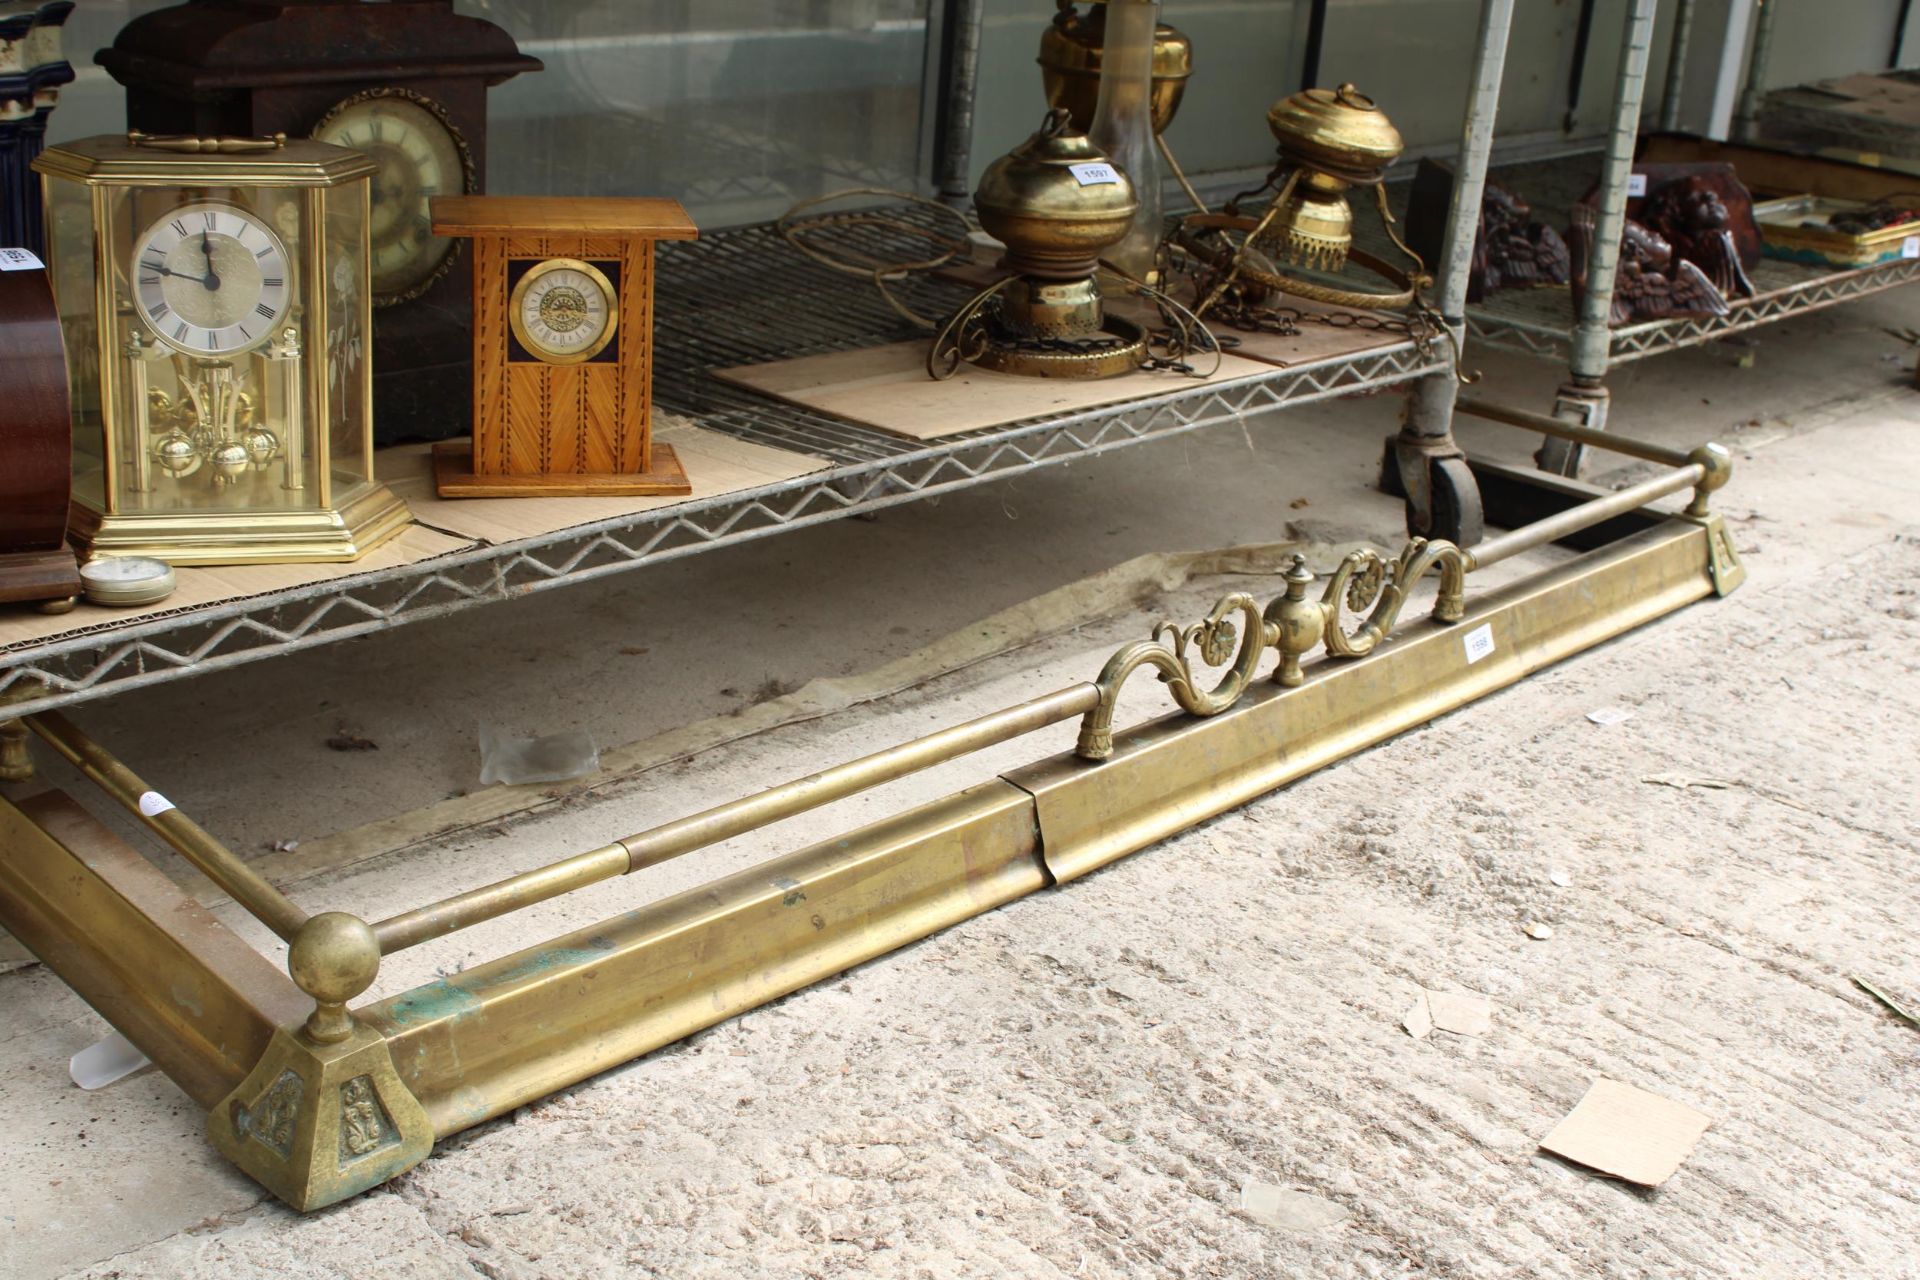 A DECORATIVE BRASS EXTENDABLE FIRE FENDER - Image 2 of 2